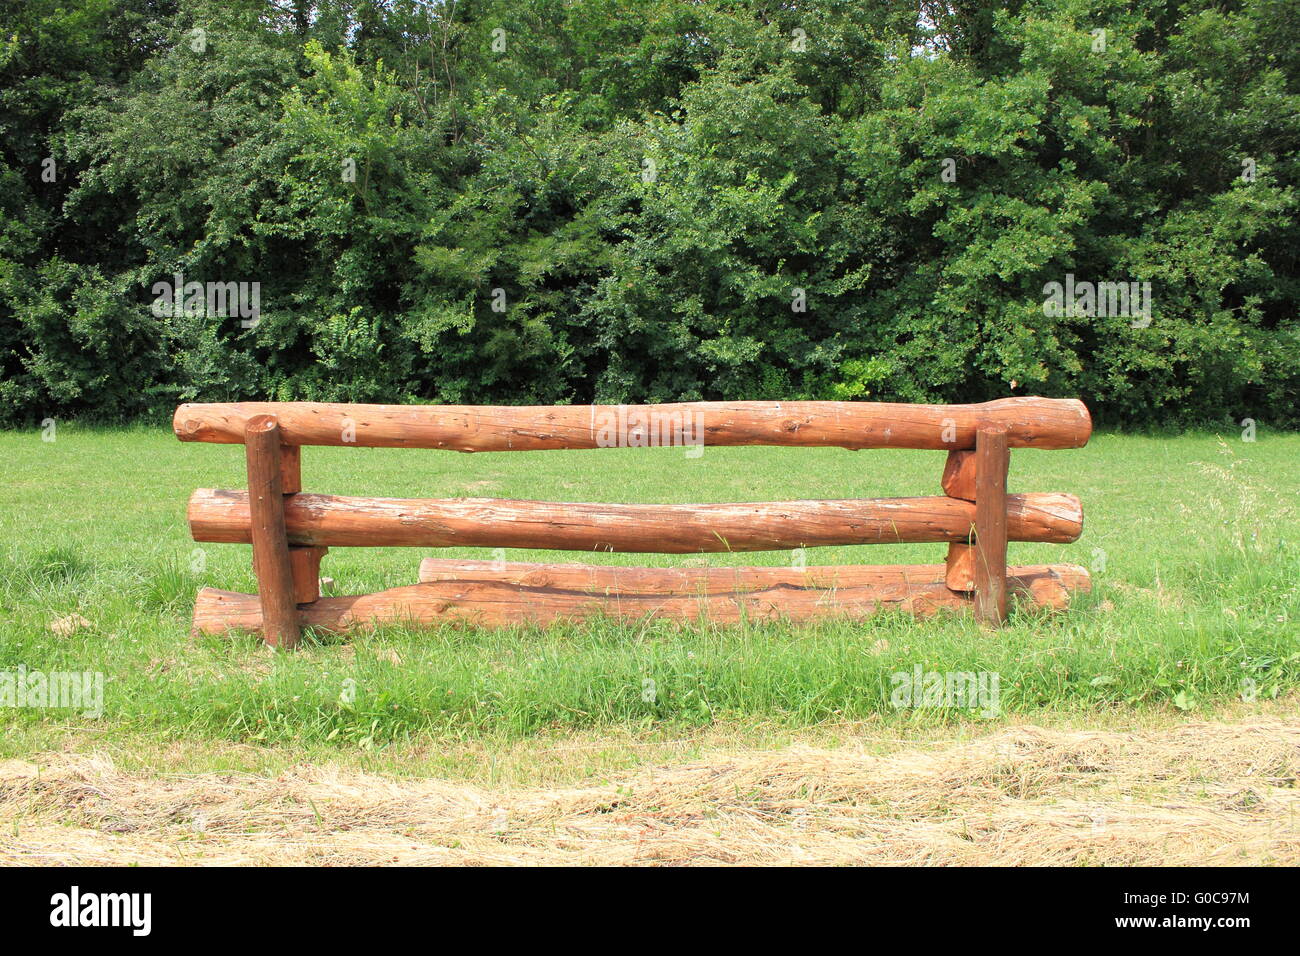 Equitation obstacle at a show jumping contest Stock Photo